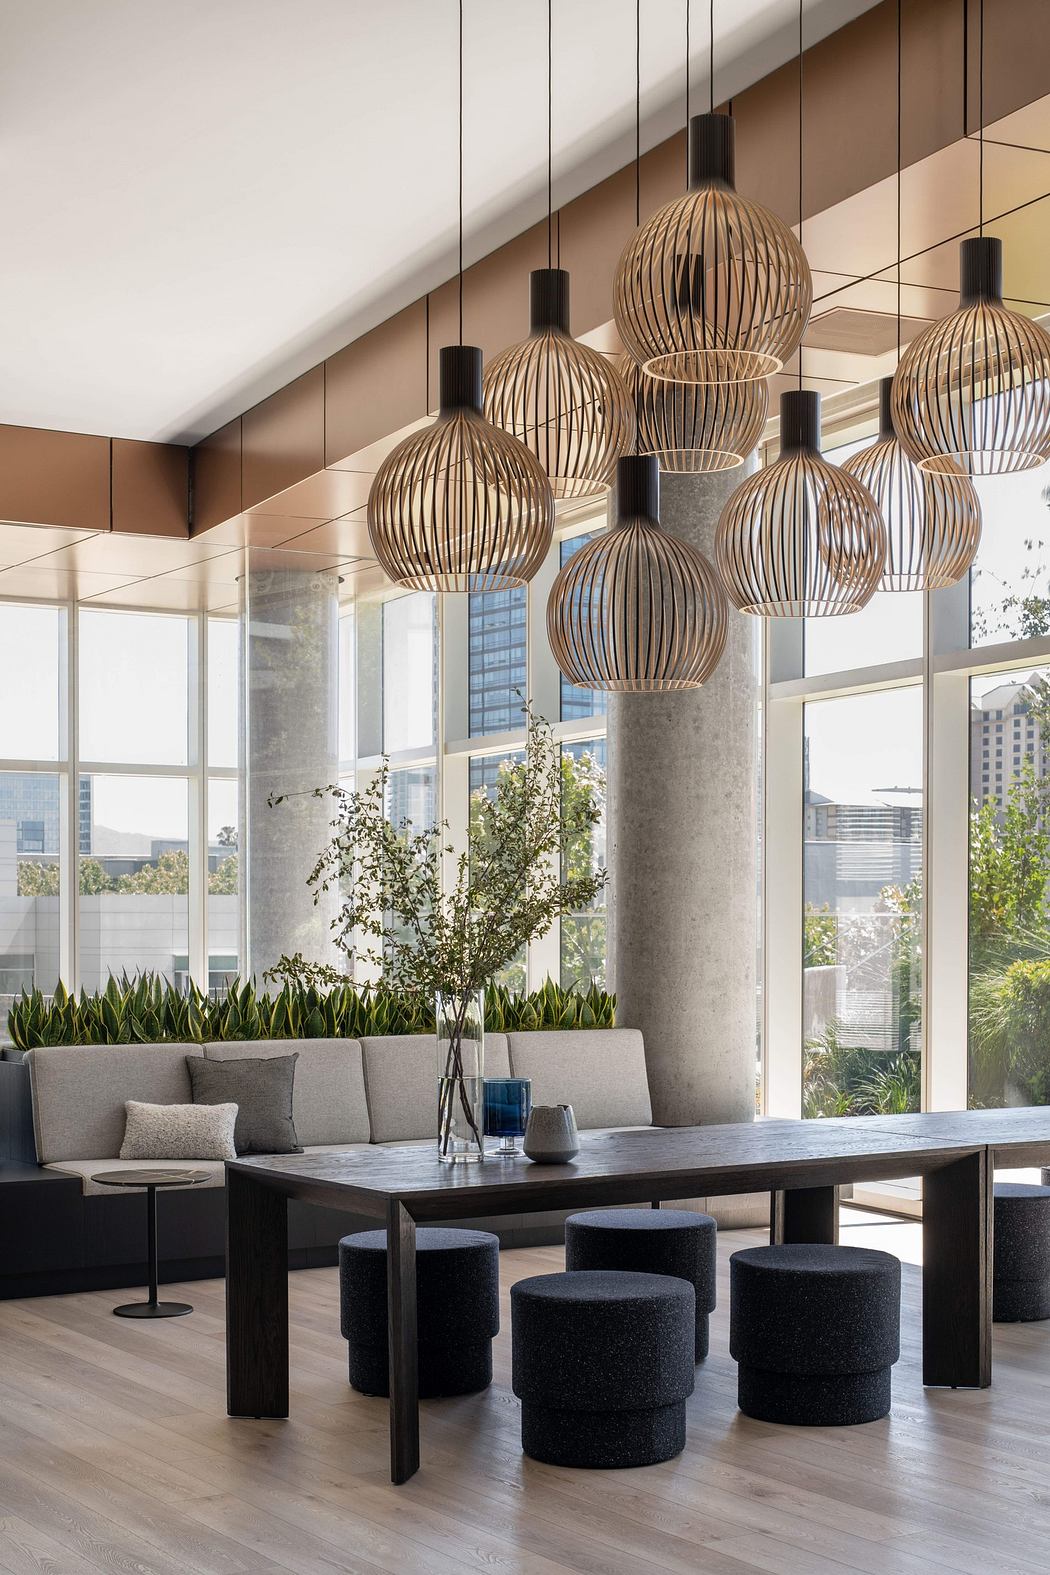 Modern lobby with wooden pendant lights, plush seating, and greenery.